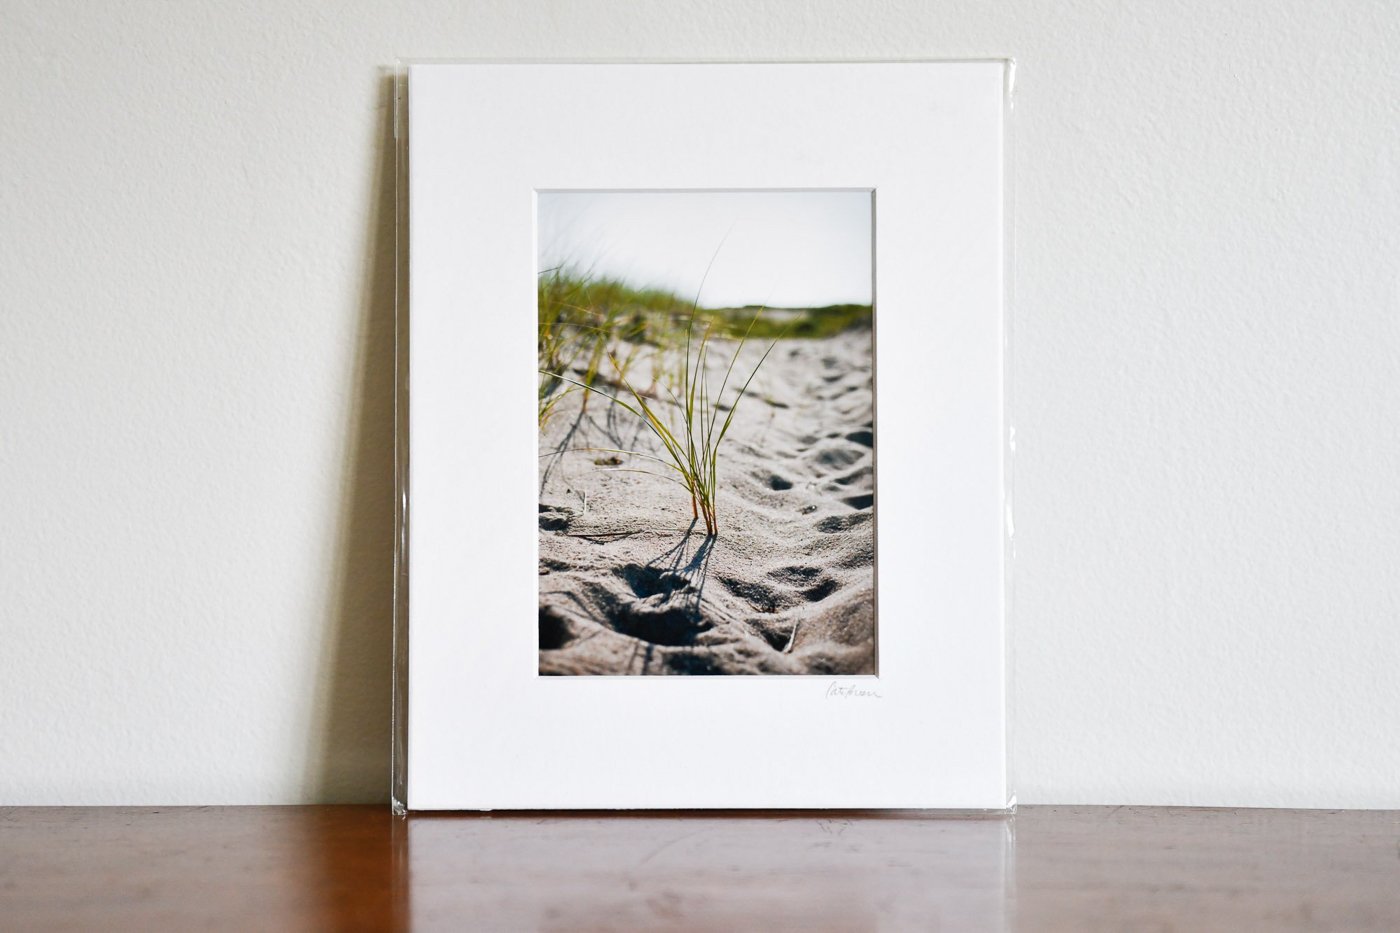 Cate Brown Photo Beach Grass #2 // Matted Mini Print 8x10" Available Inventory Ocean Fine Art